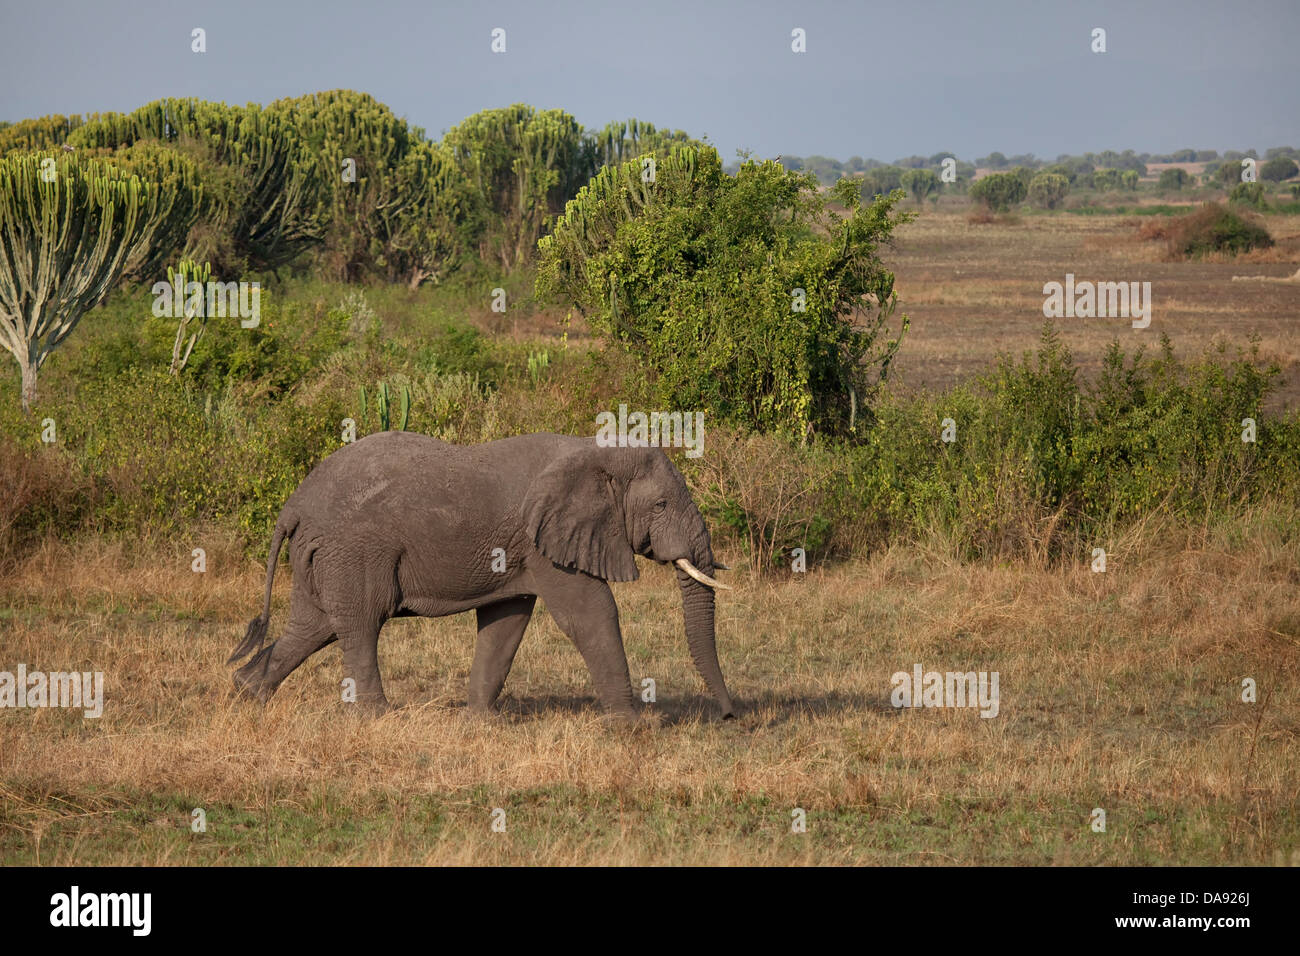 Africa, Uganda, East Africa, black continent, pearl of Africa, Great Rift, Queen Elisabeth, national park, nature, elephant, Afr Stock Photo